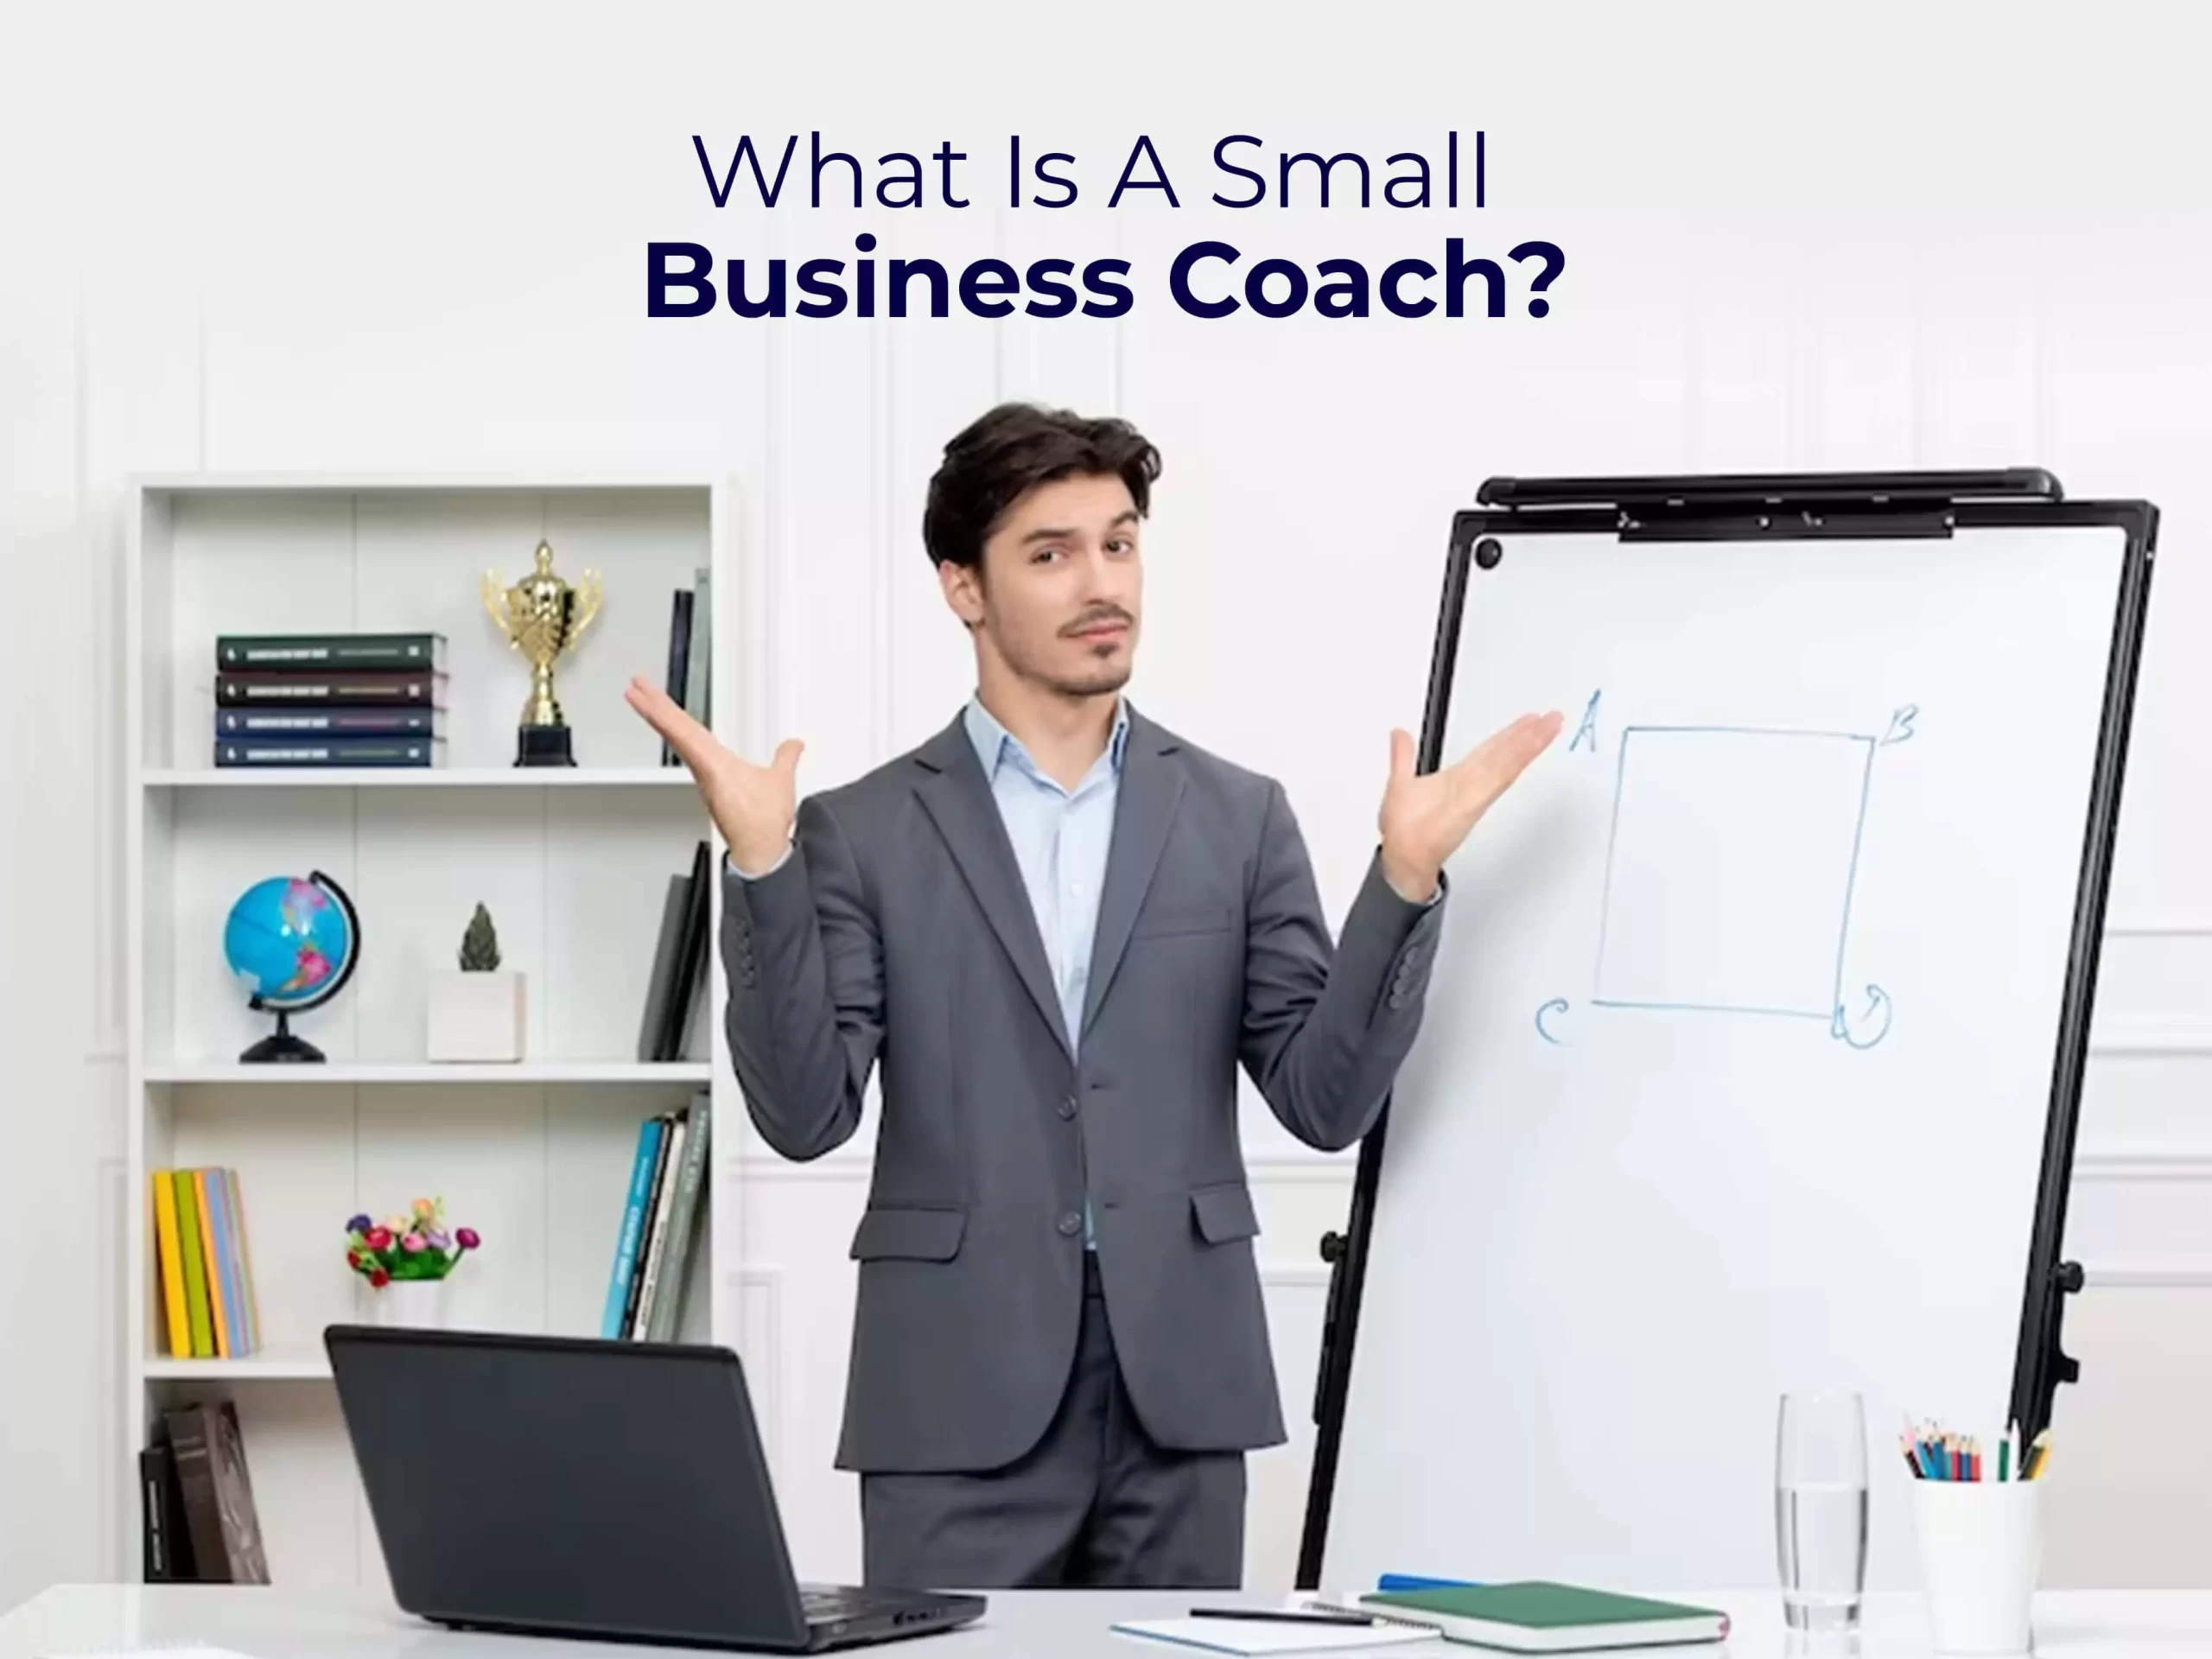 What Is A Small Business Coach?